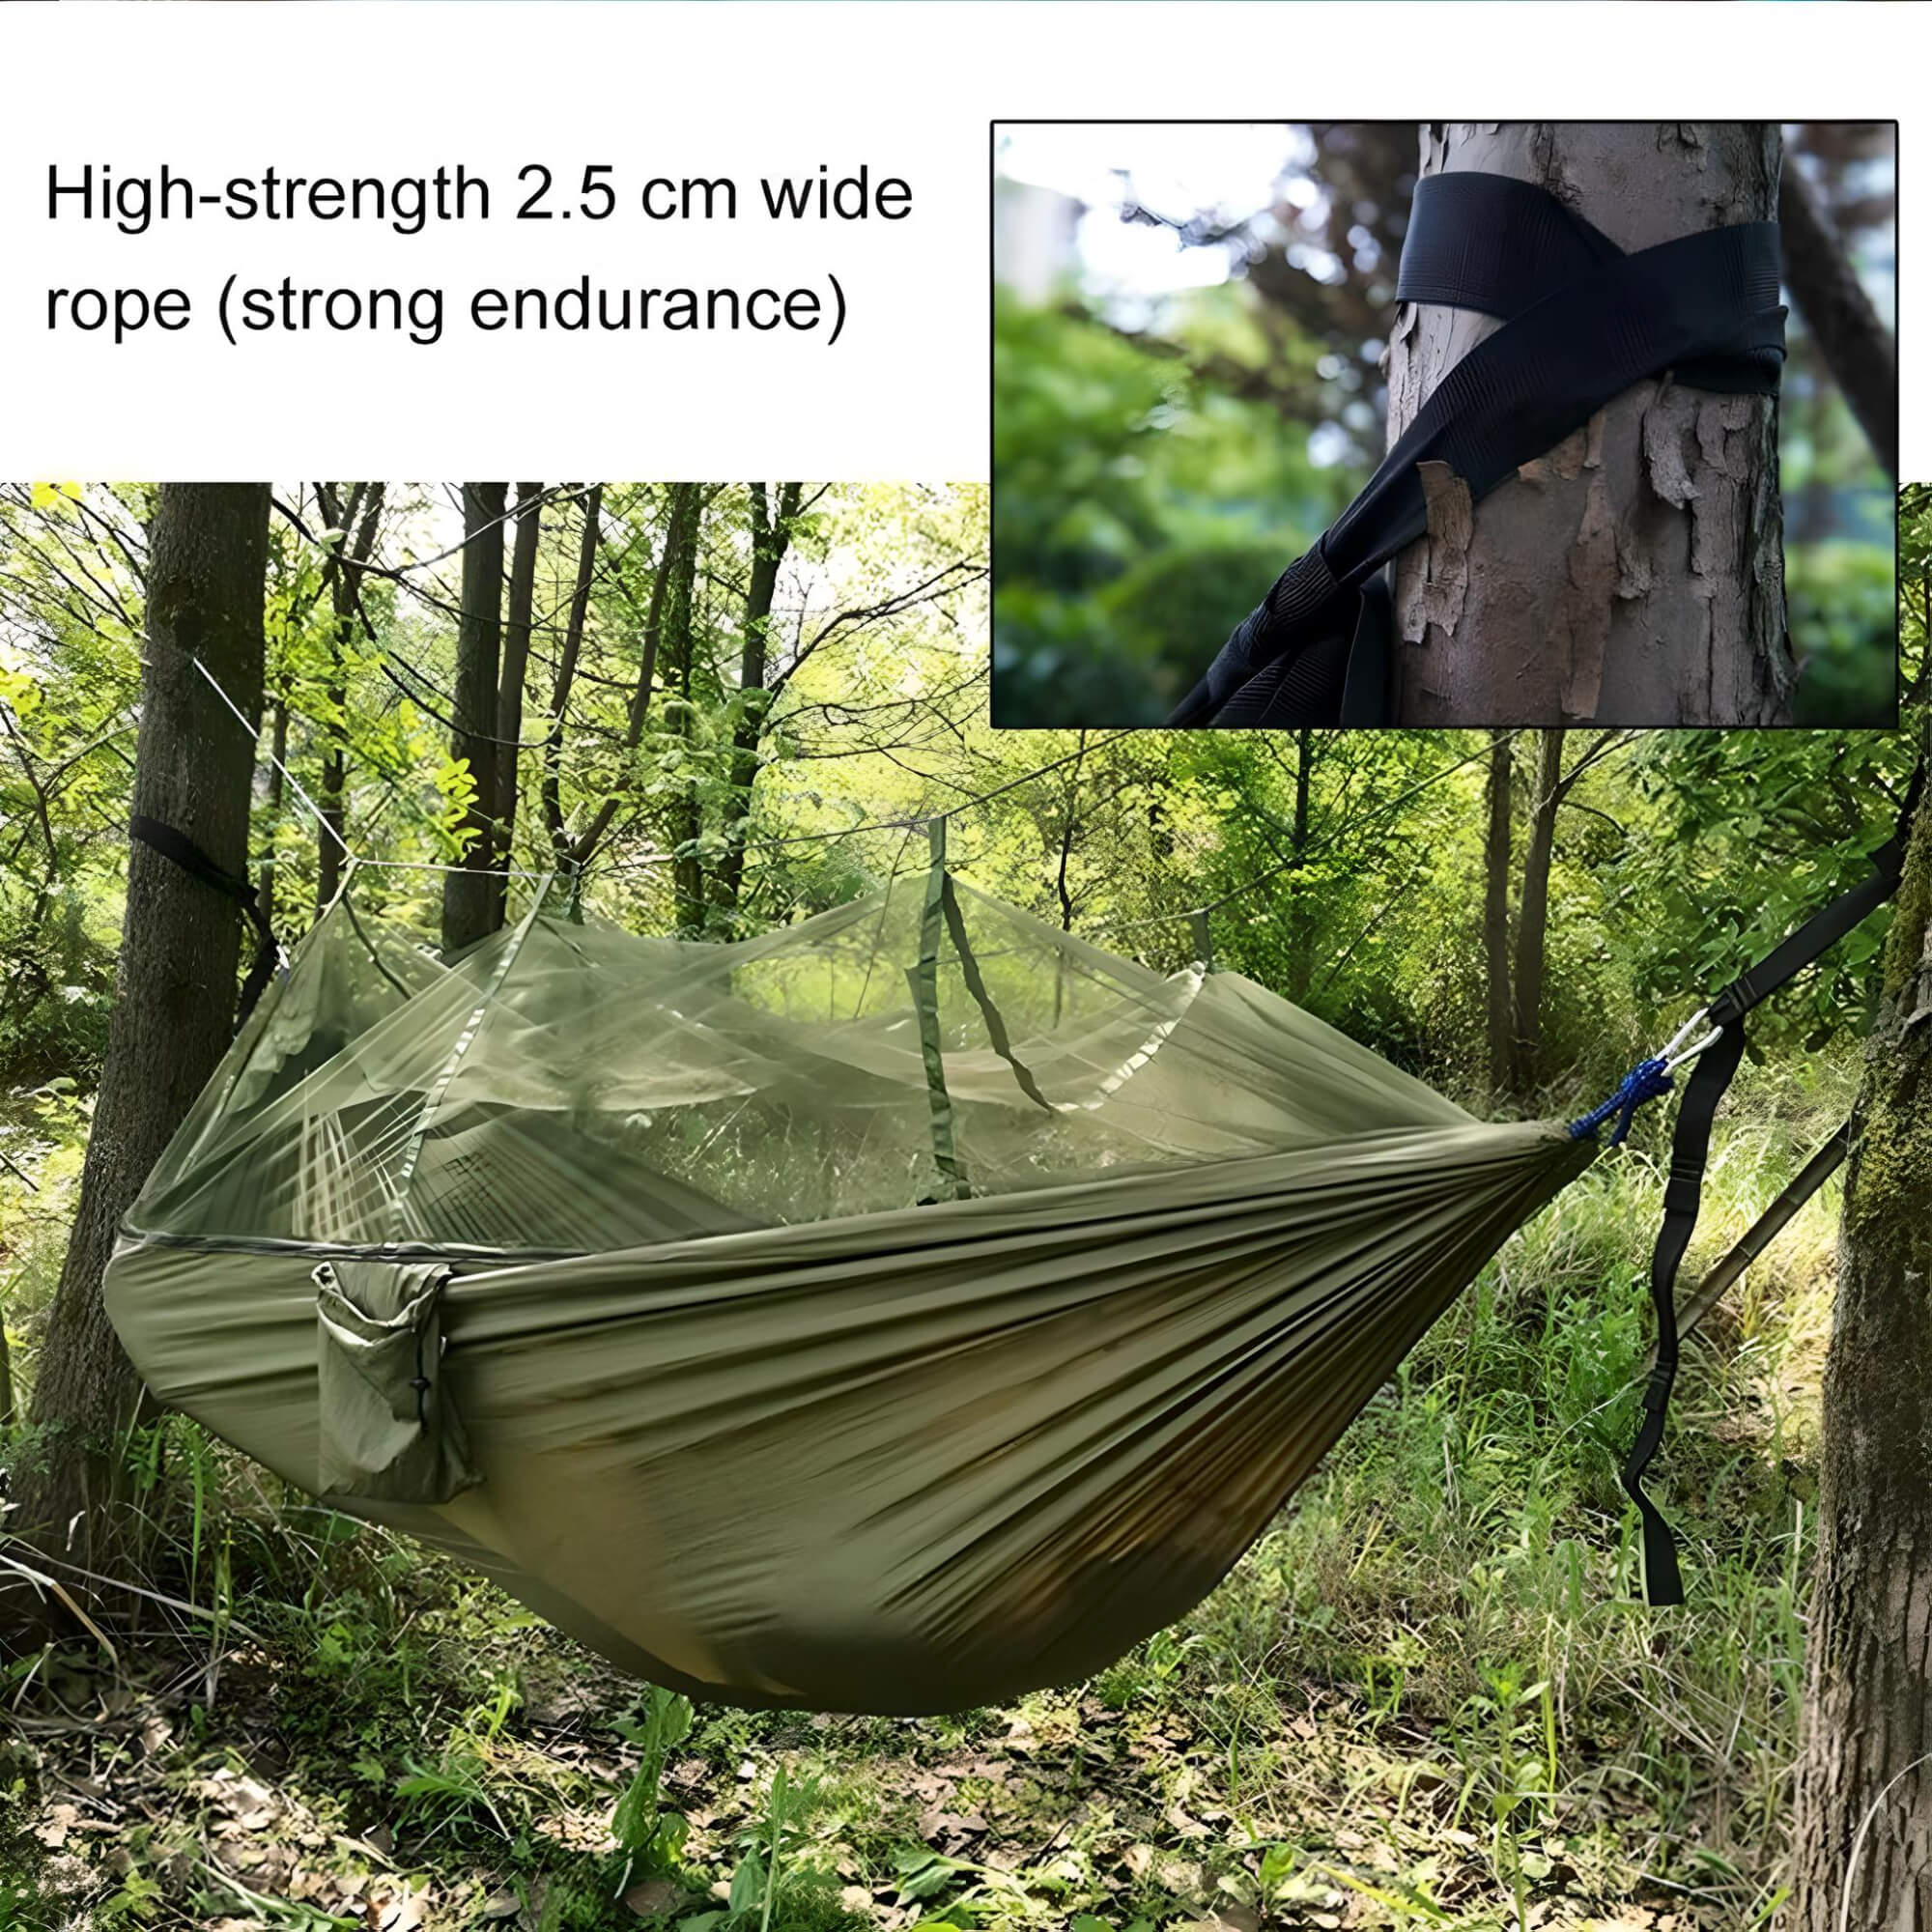 wide-ropes-of-camping-hammock-with-mosquito-net